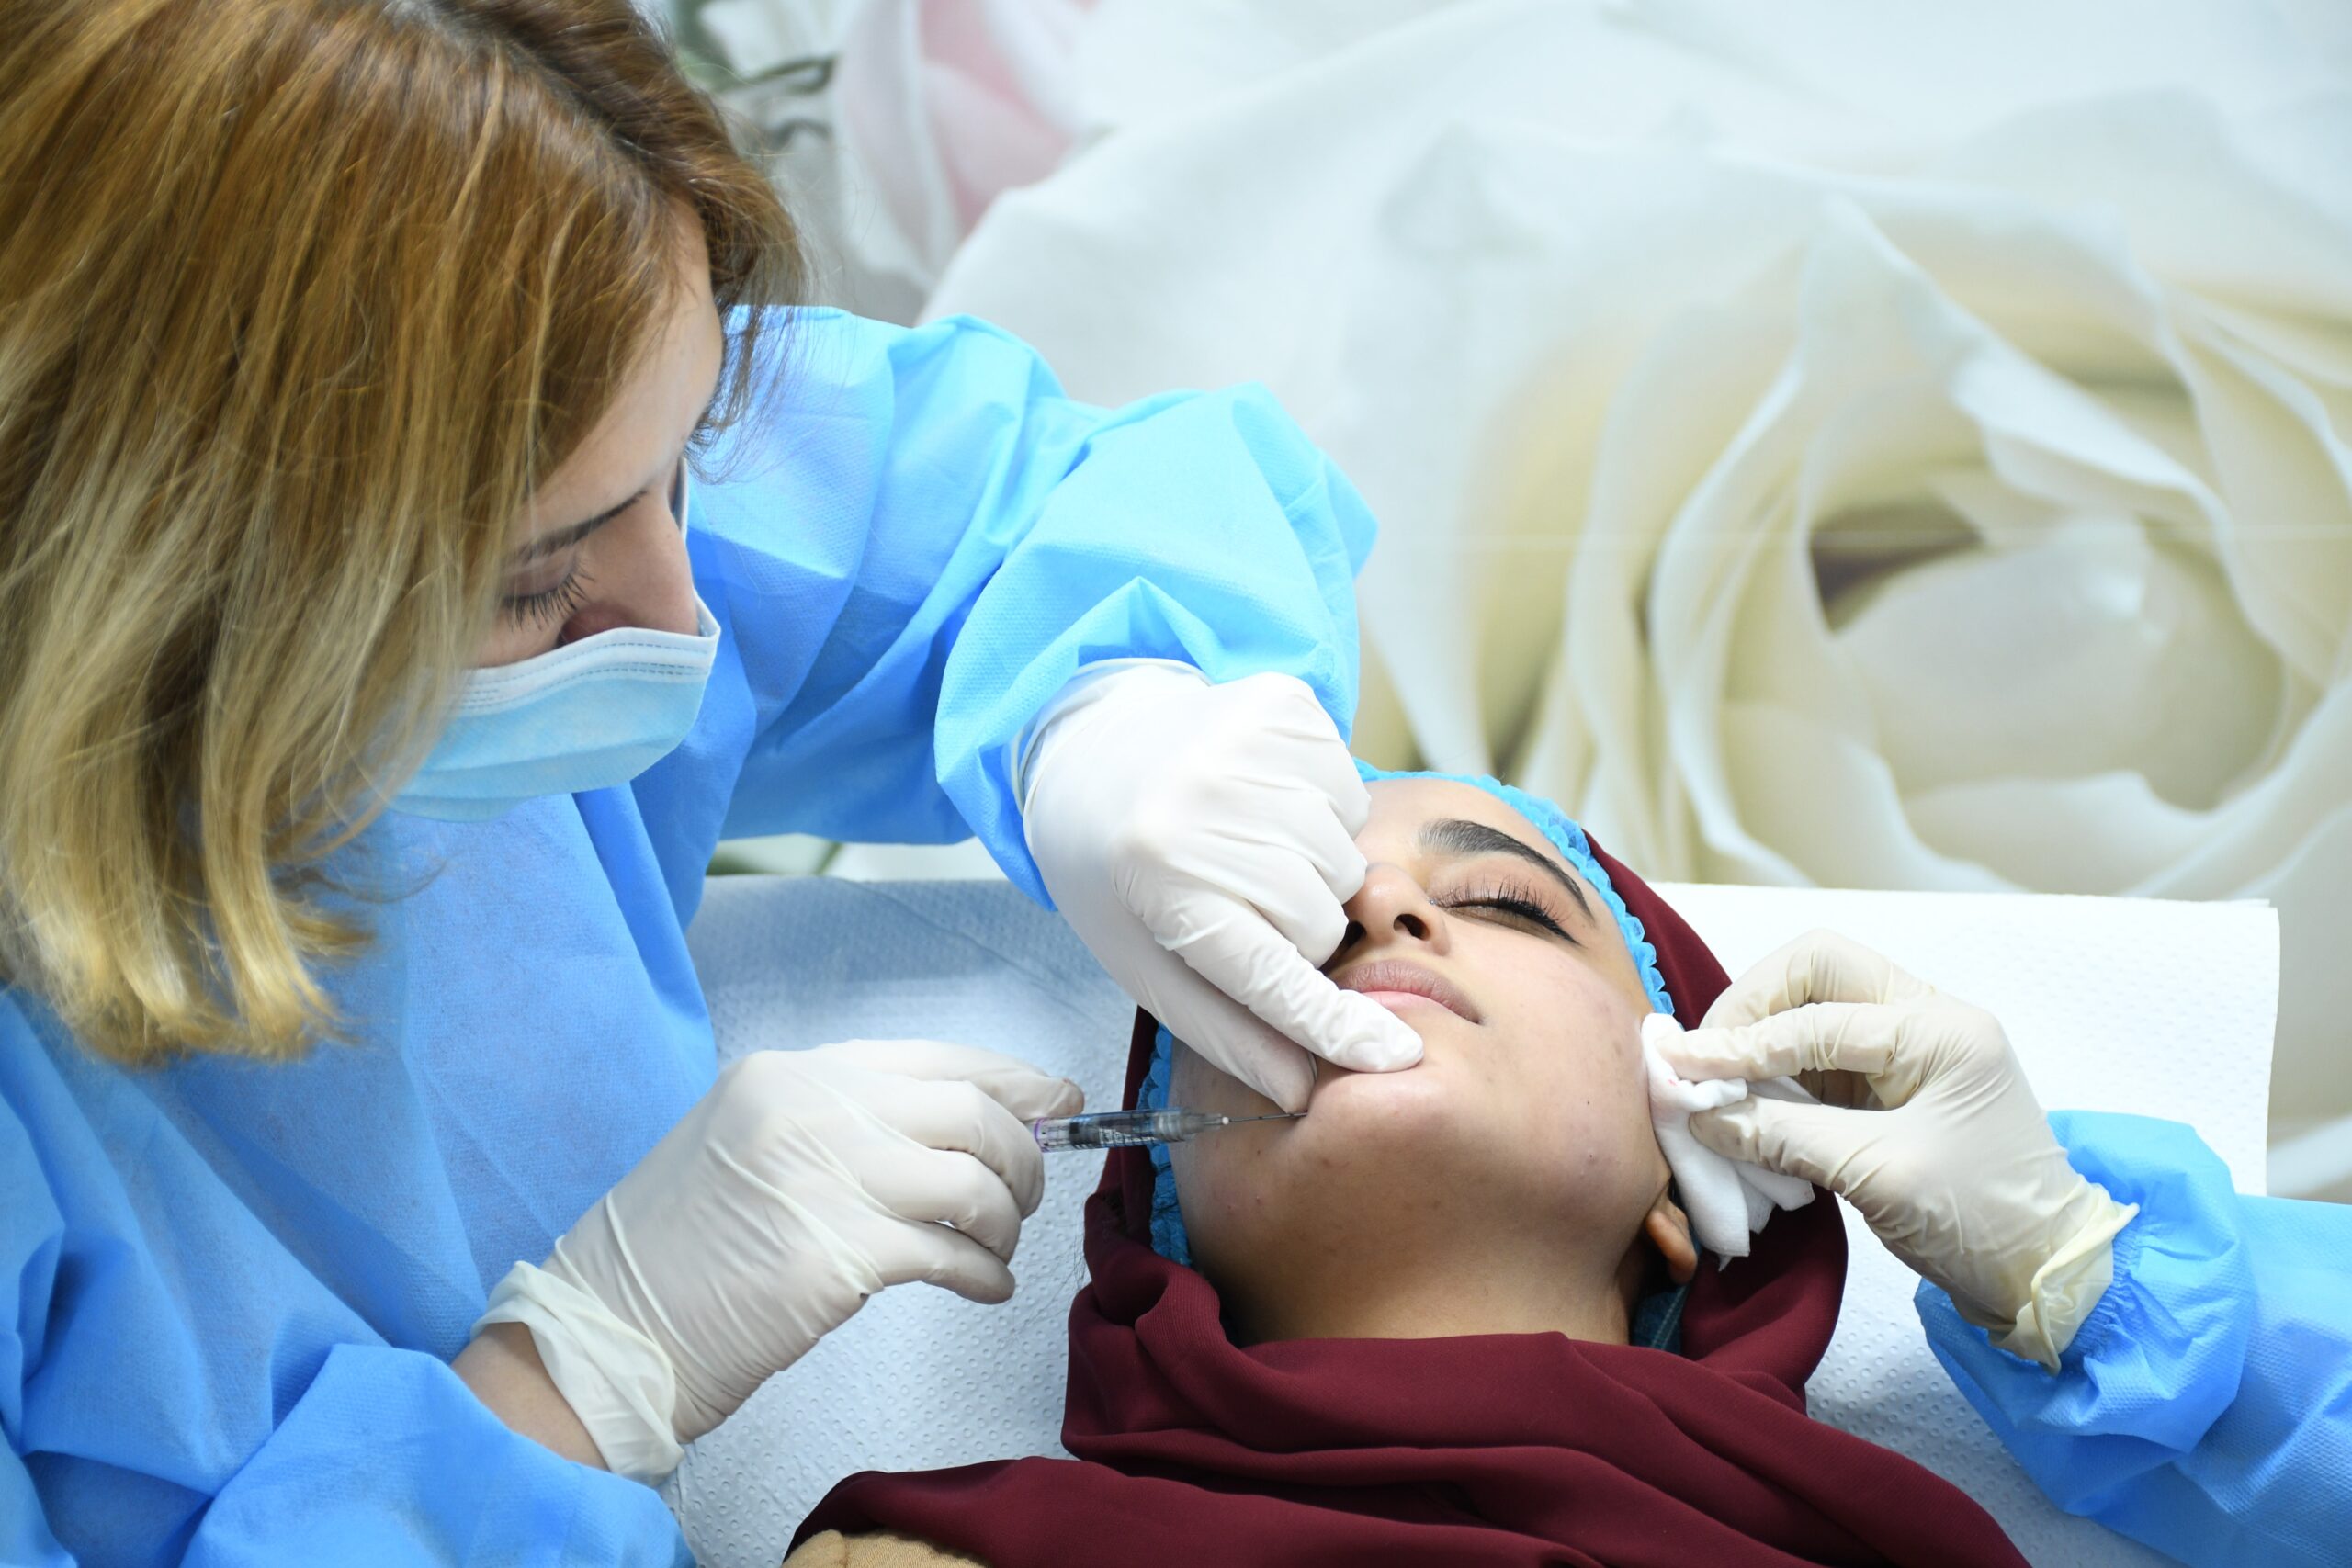 Dental, Therapeutic, and Cosmetic Botox